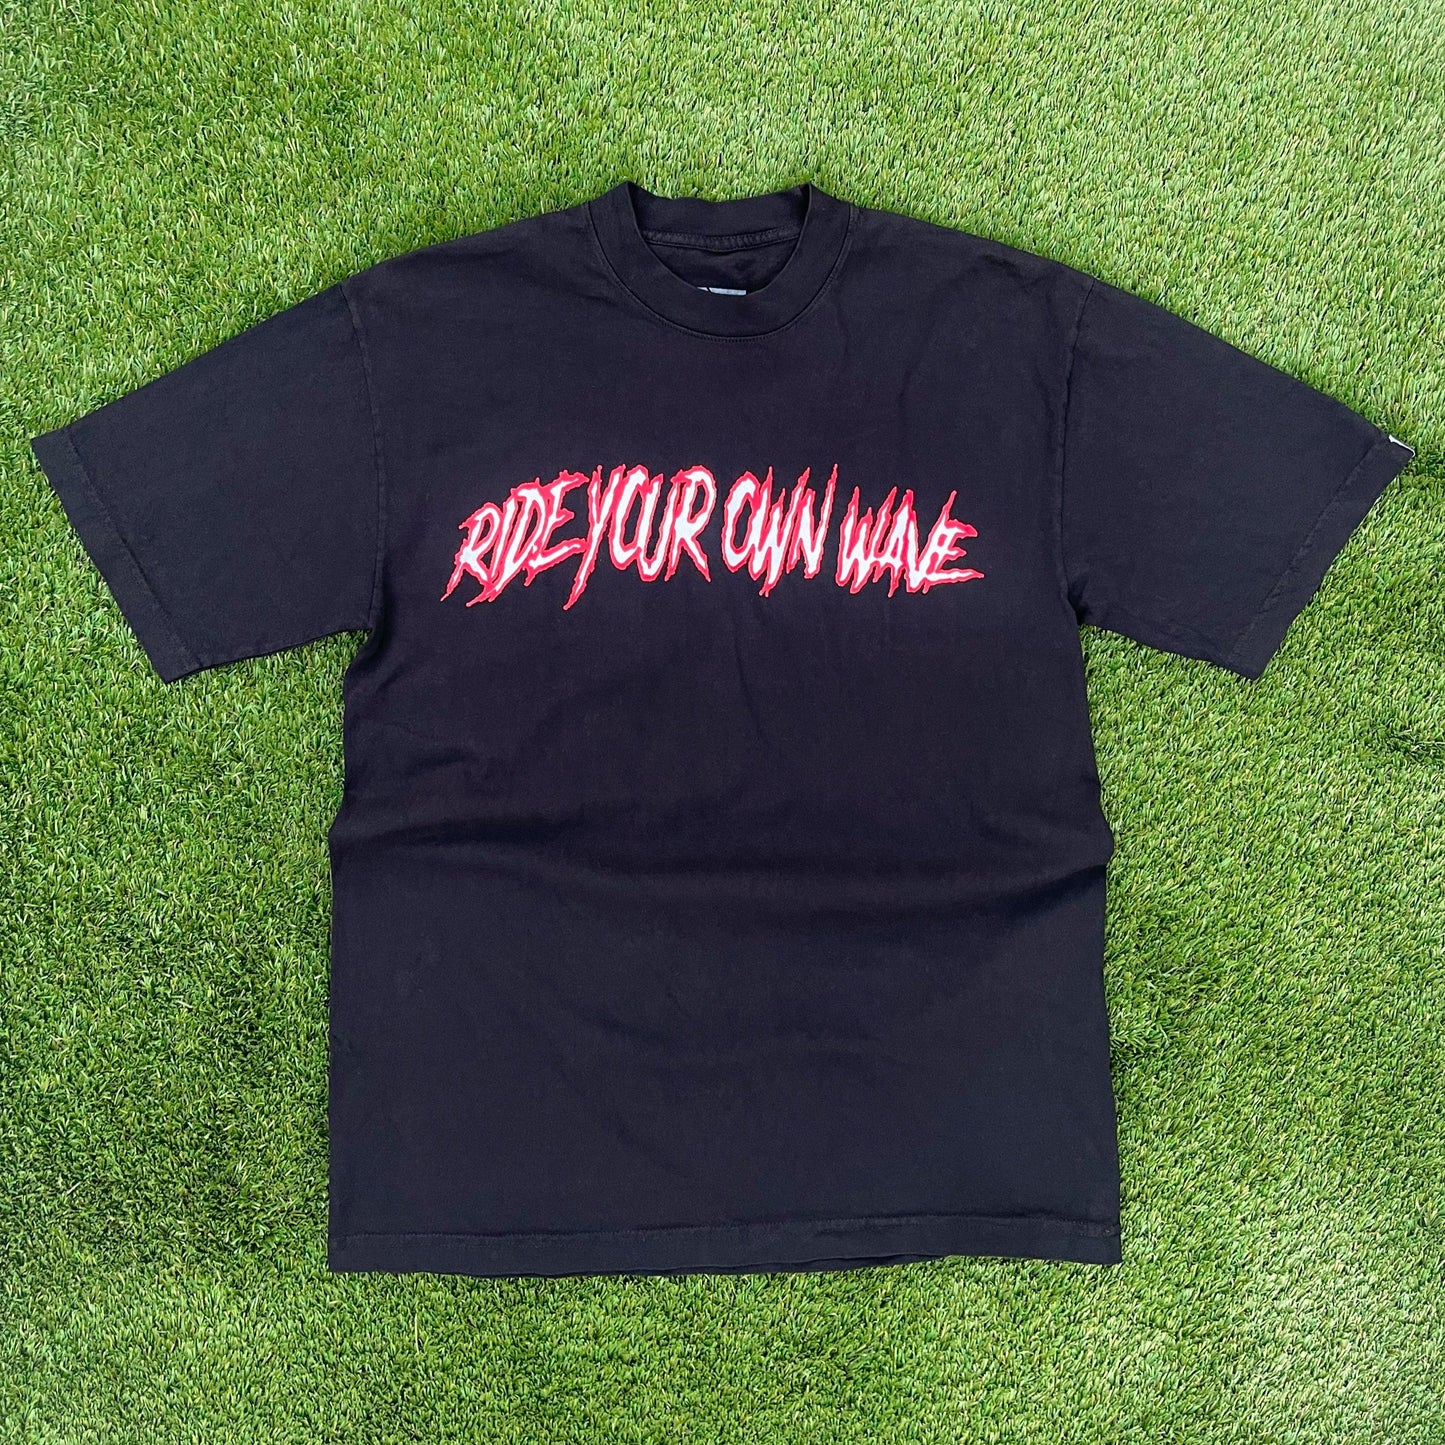 “Ride Your Own Wave” Tee (Black)